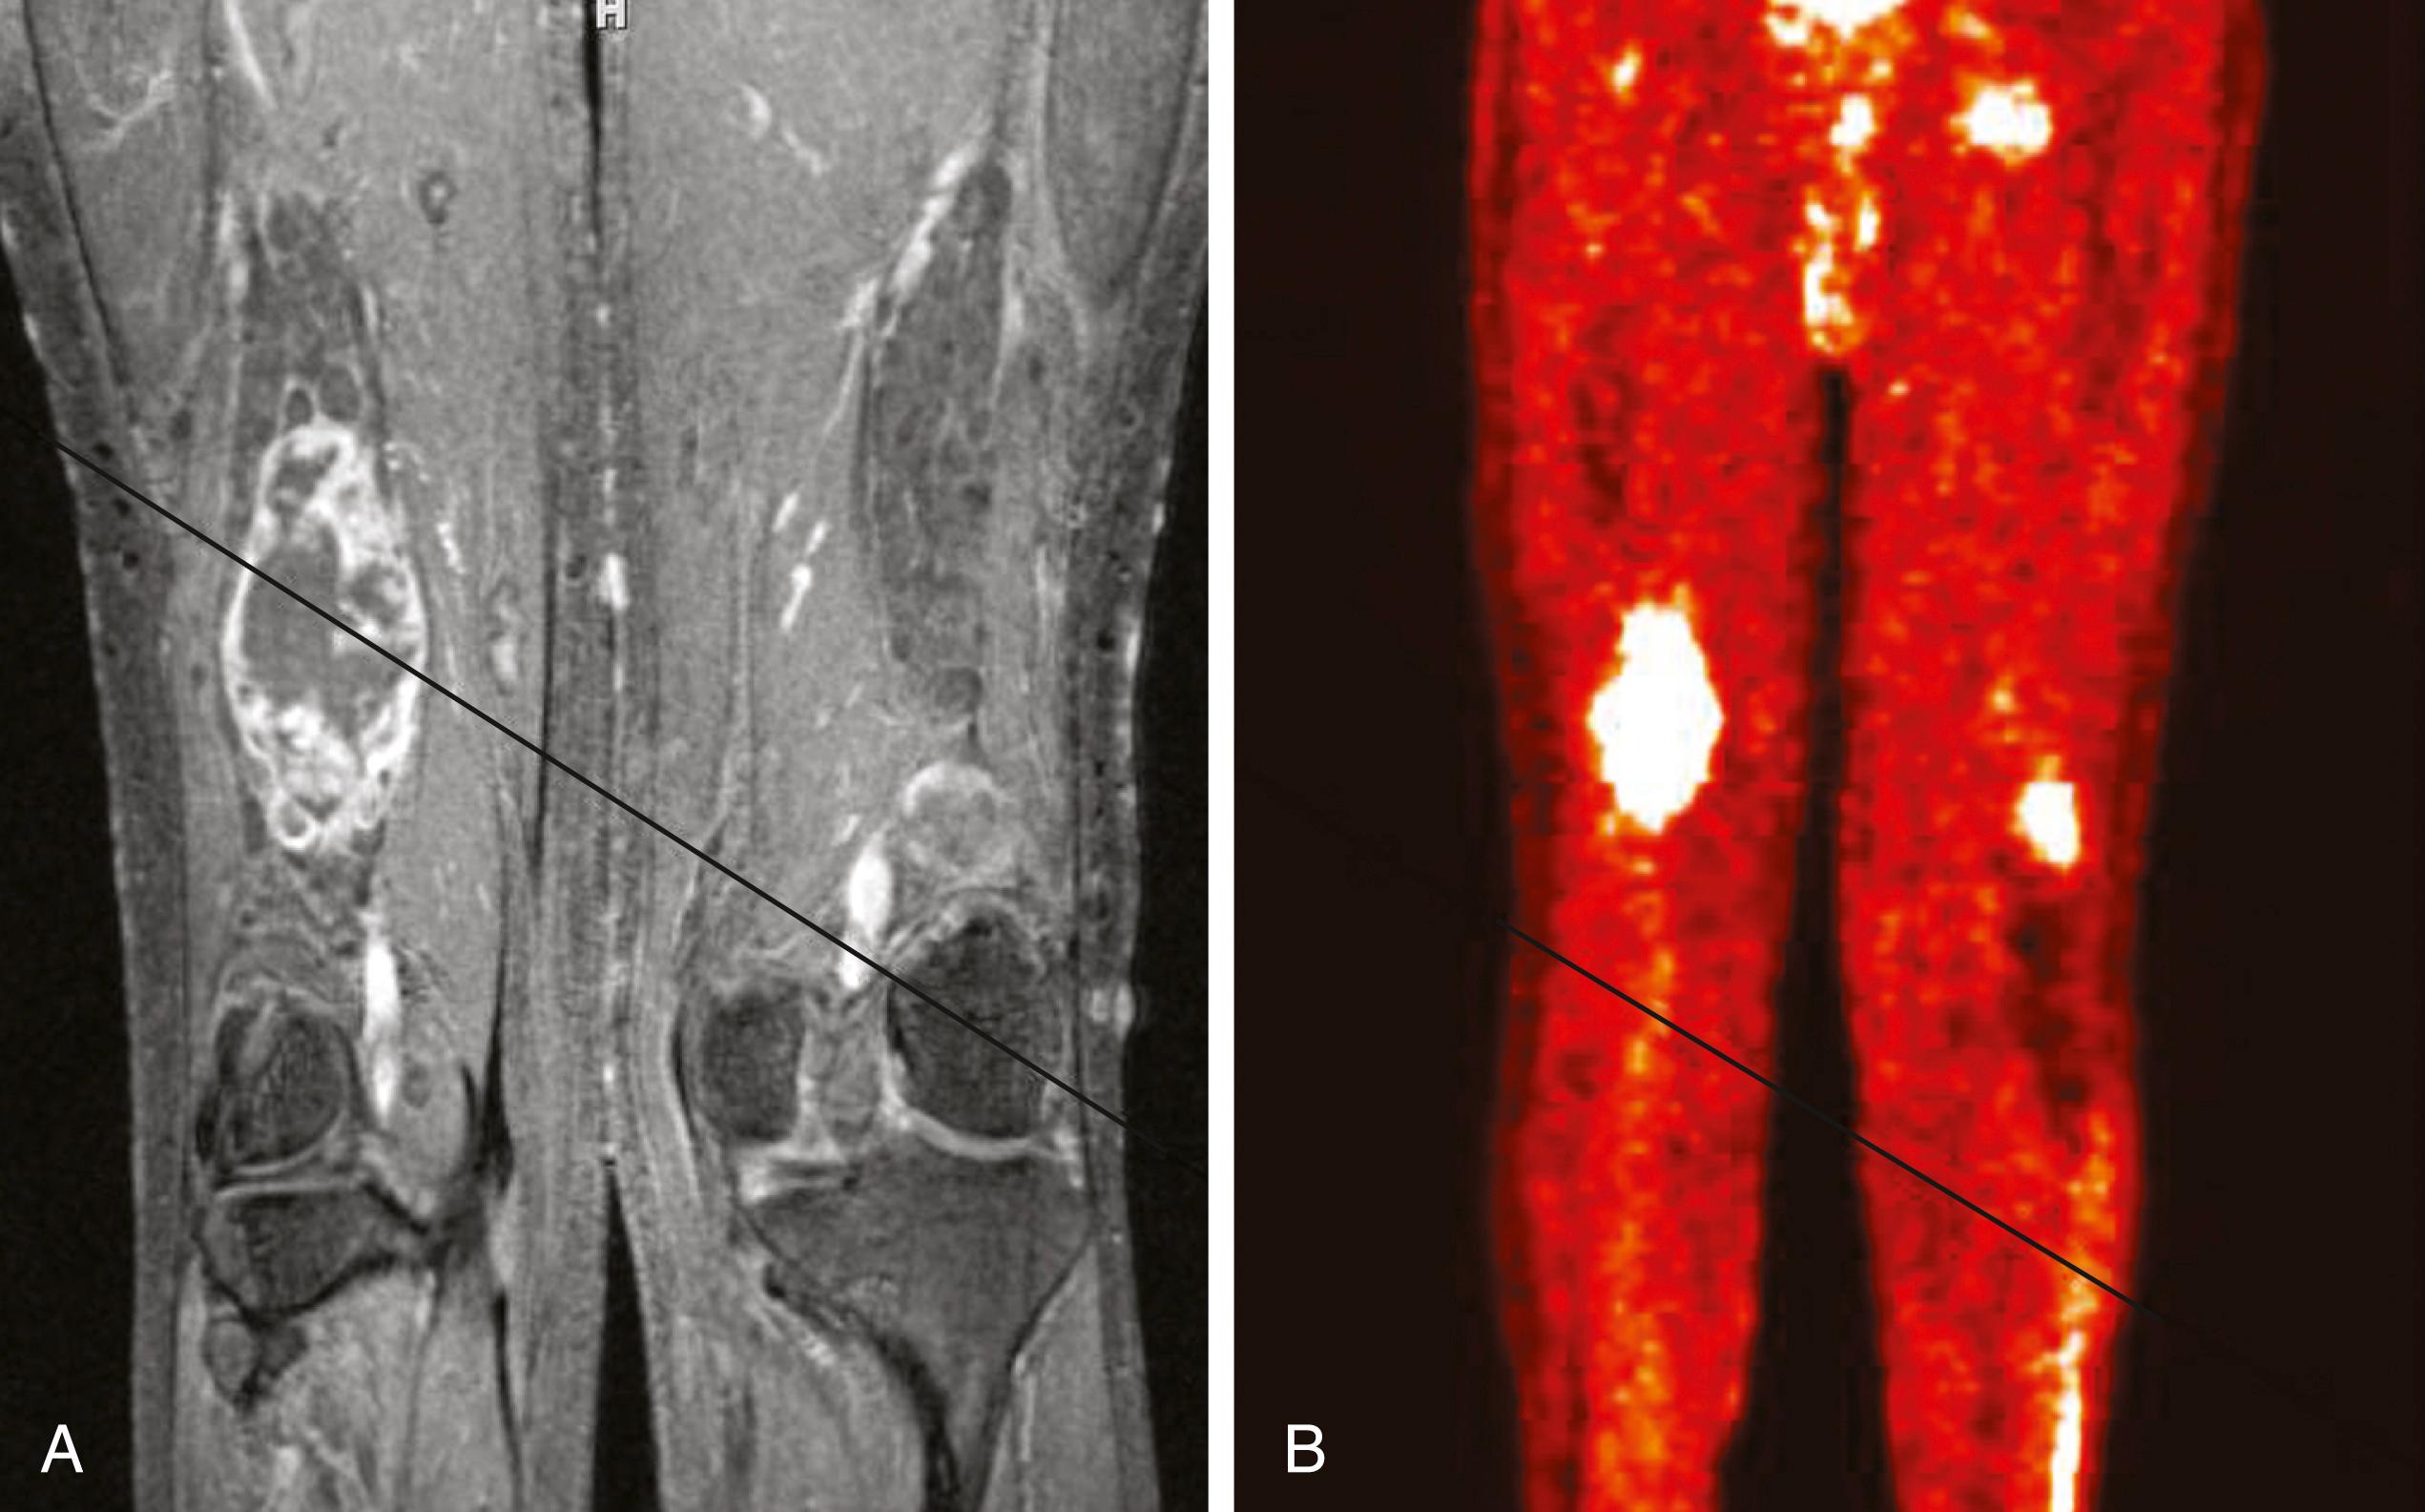 Fig. 190.4, Magnetic resonance image and 18 fluorodeoxyglucose positron emission tomography ( 18 FDG-PET) of a malignant peripheral nerve sheath tumor of the sciatic nerve. (A) Coronal T1-weighted postgadolinium image demonstrates a large, infiltrative, heterogeneously enhancing tumor of the right sciatic nerve with areas of necrosis. (B) Coronal FDG-PET scan demonstrating marked uptake within the right sciatic nerve tumor.